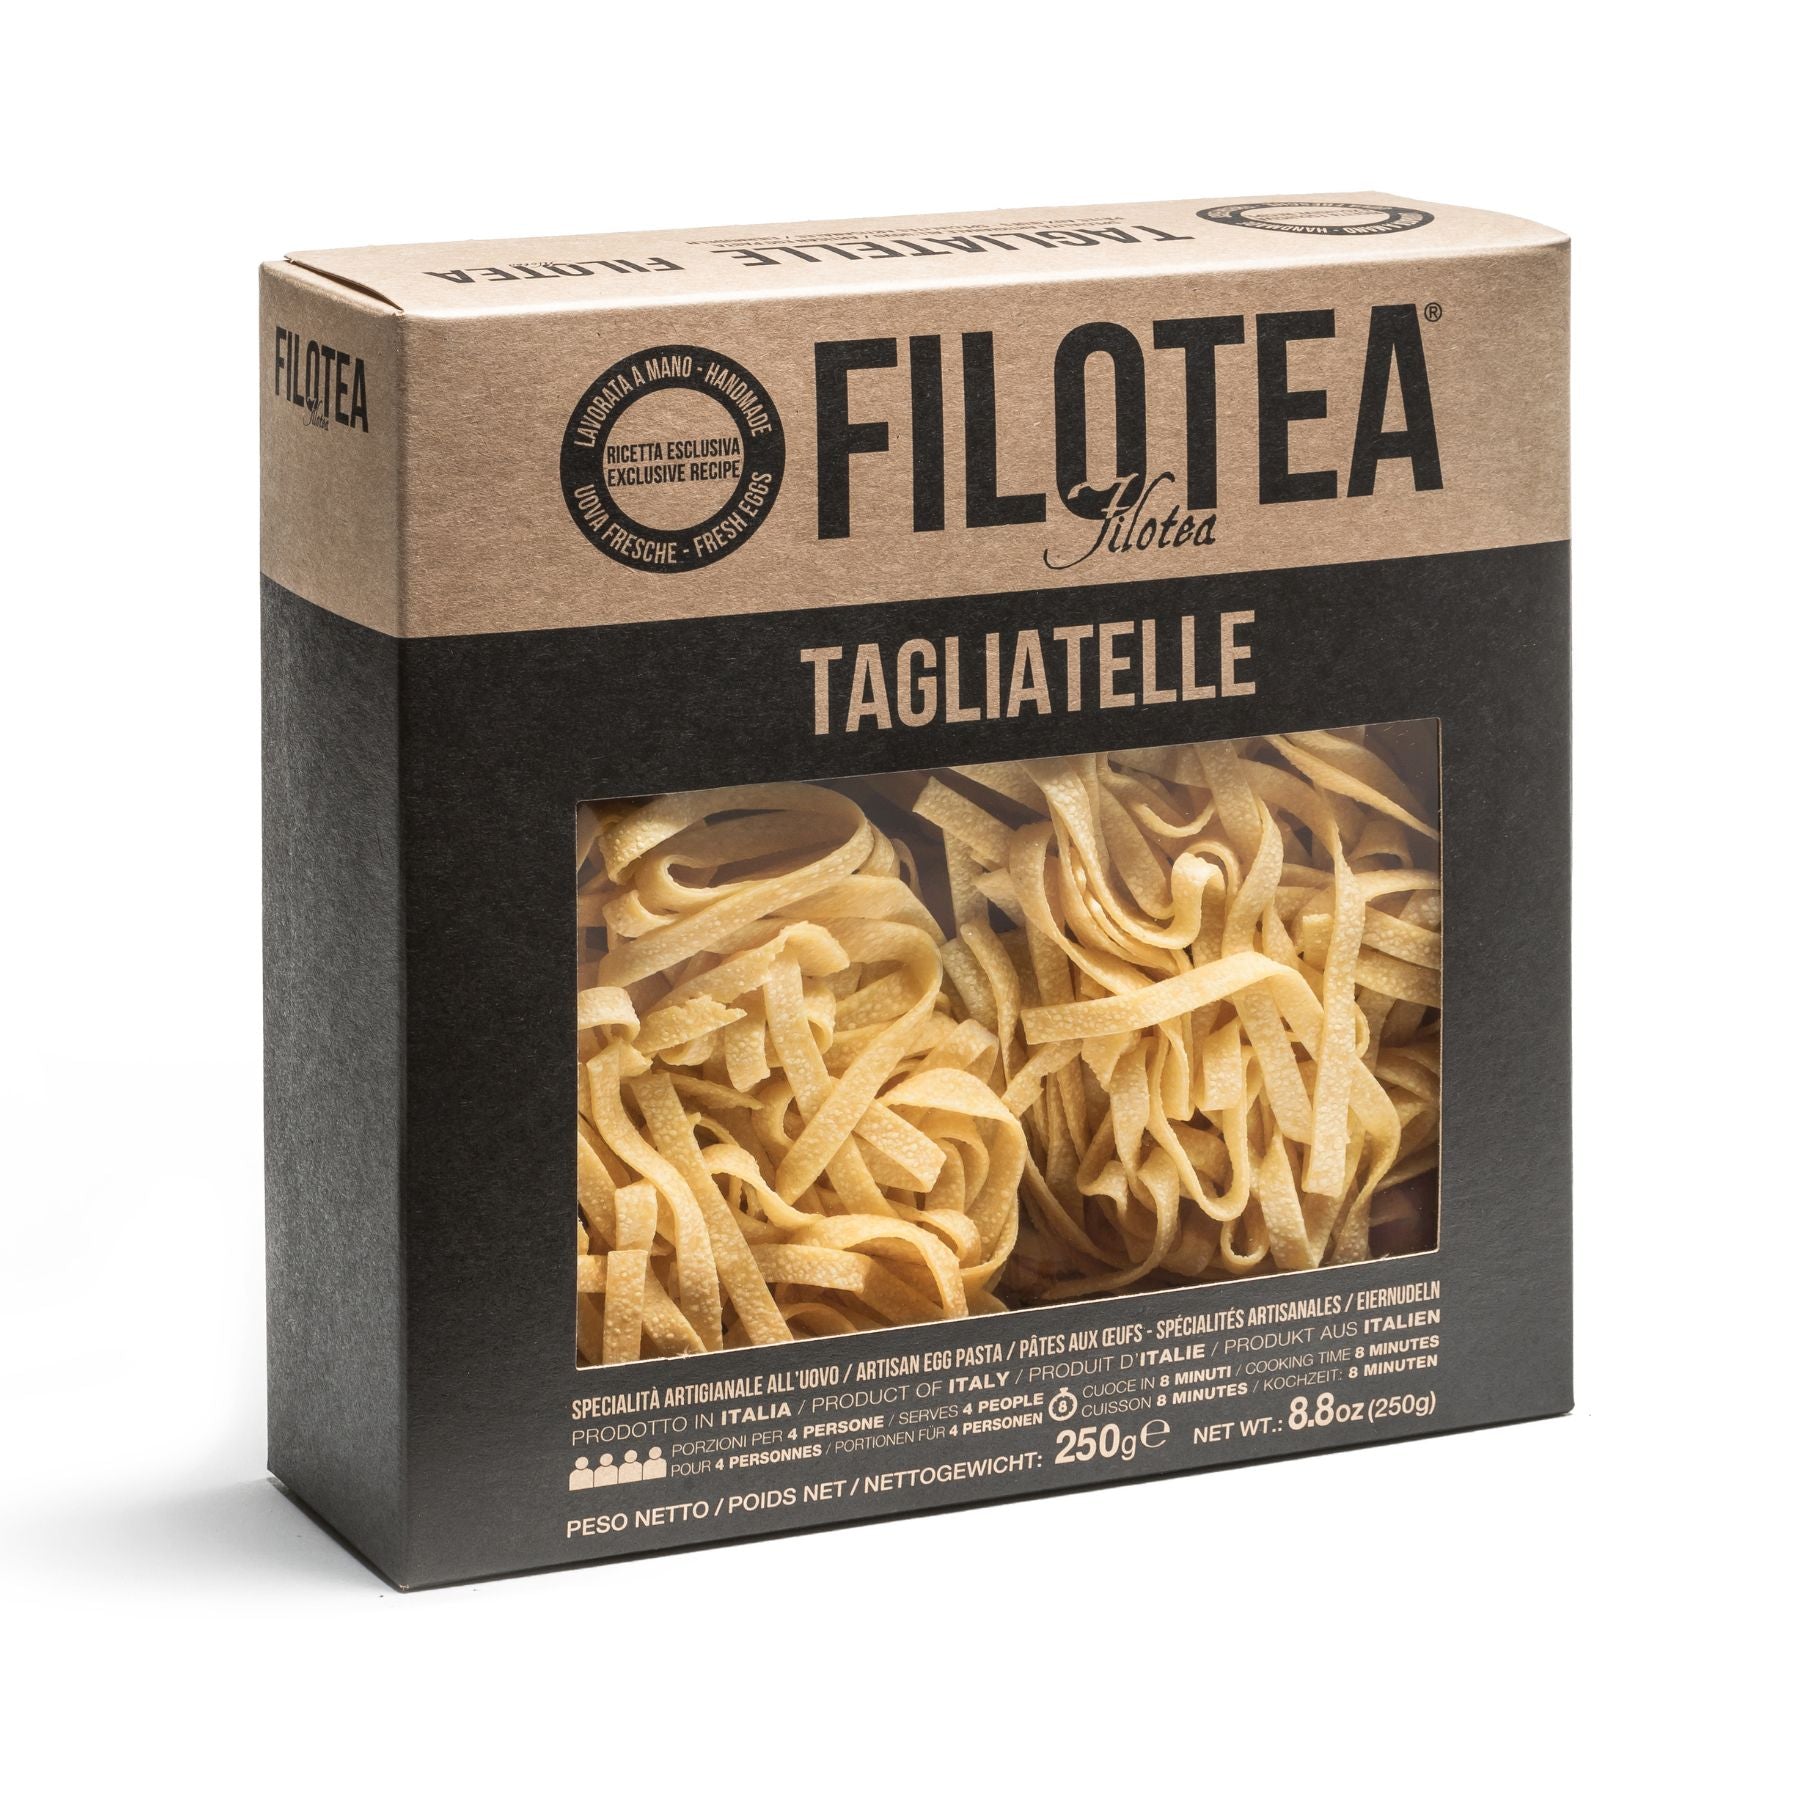 Filotea Le Matassine Tagliatelle Nest Artisan Egg Pasta 250g | Imported and distributed in the UK by Just Gourmet Foods